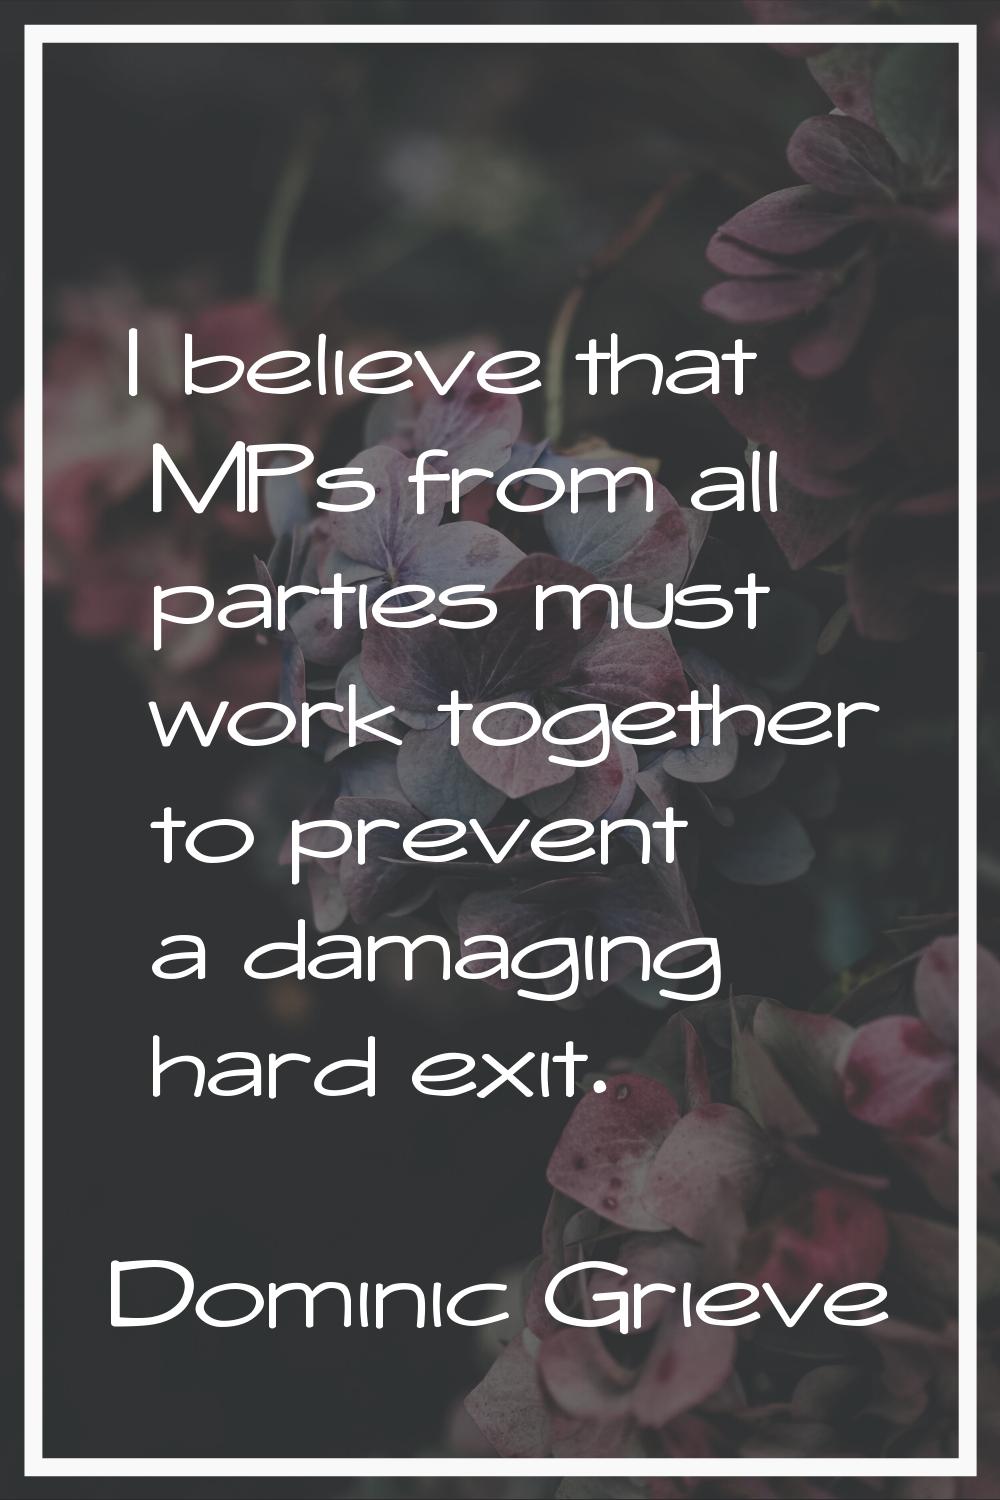 I believe that MPs from all parties must work together to prevent a damaging hard exit.